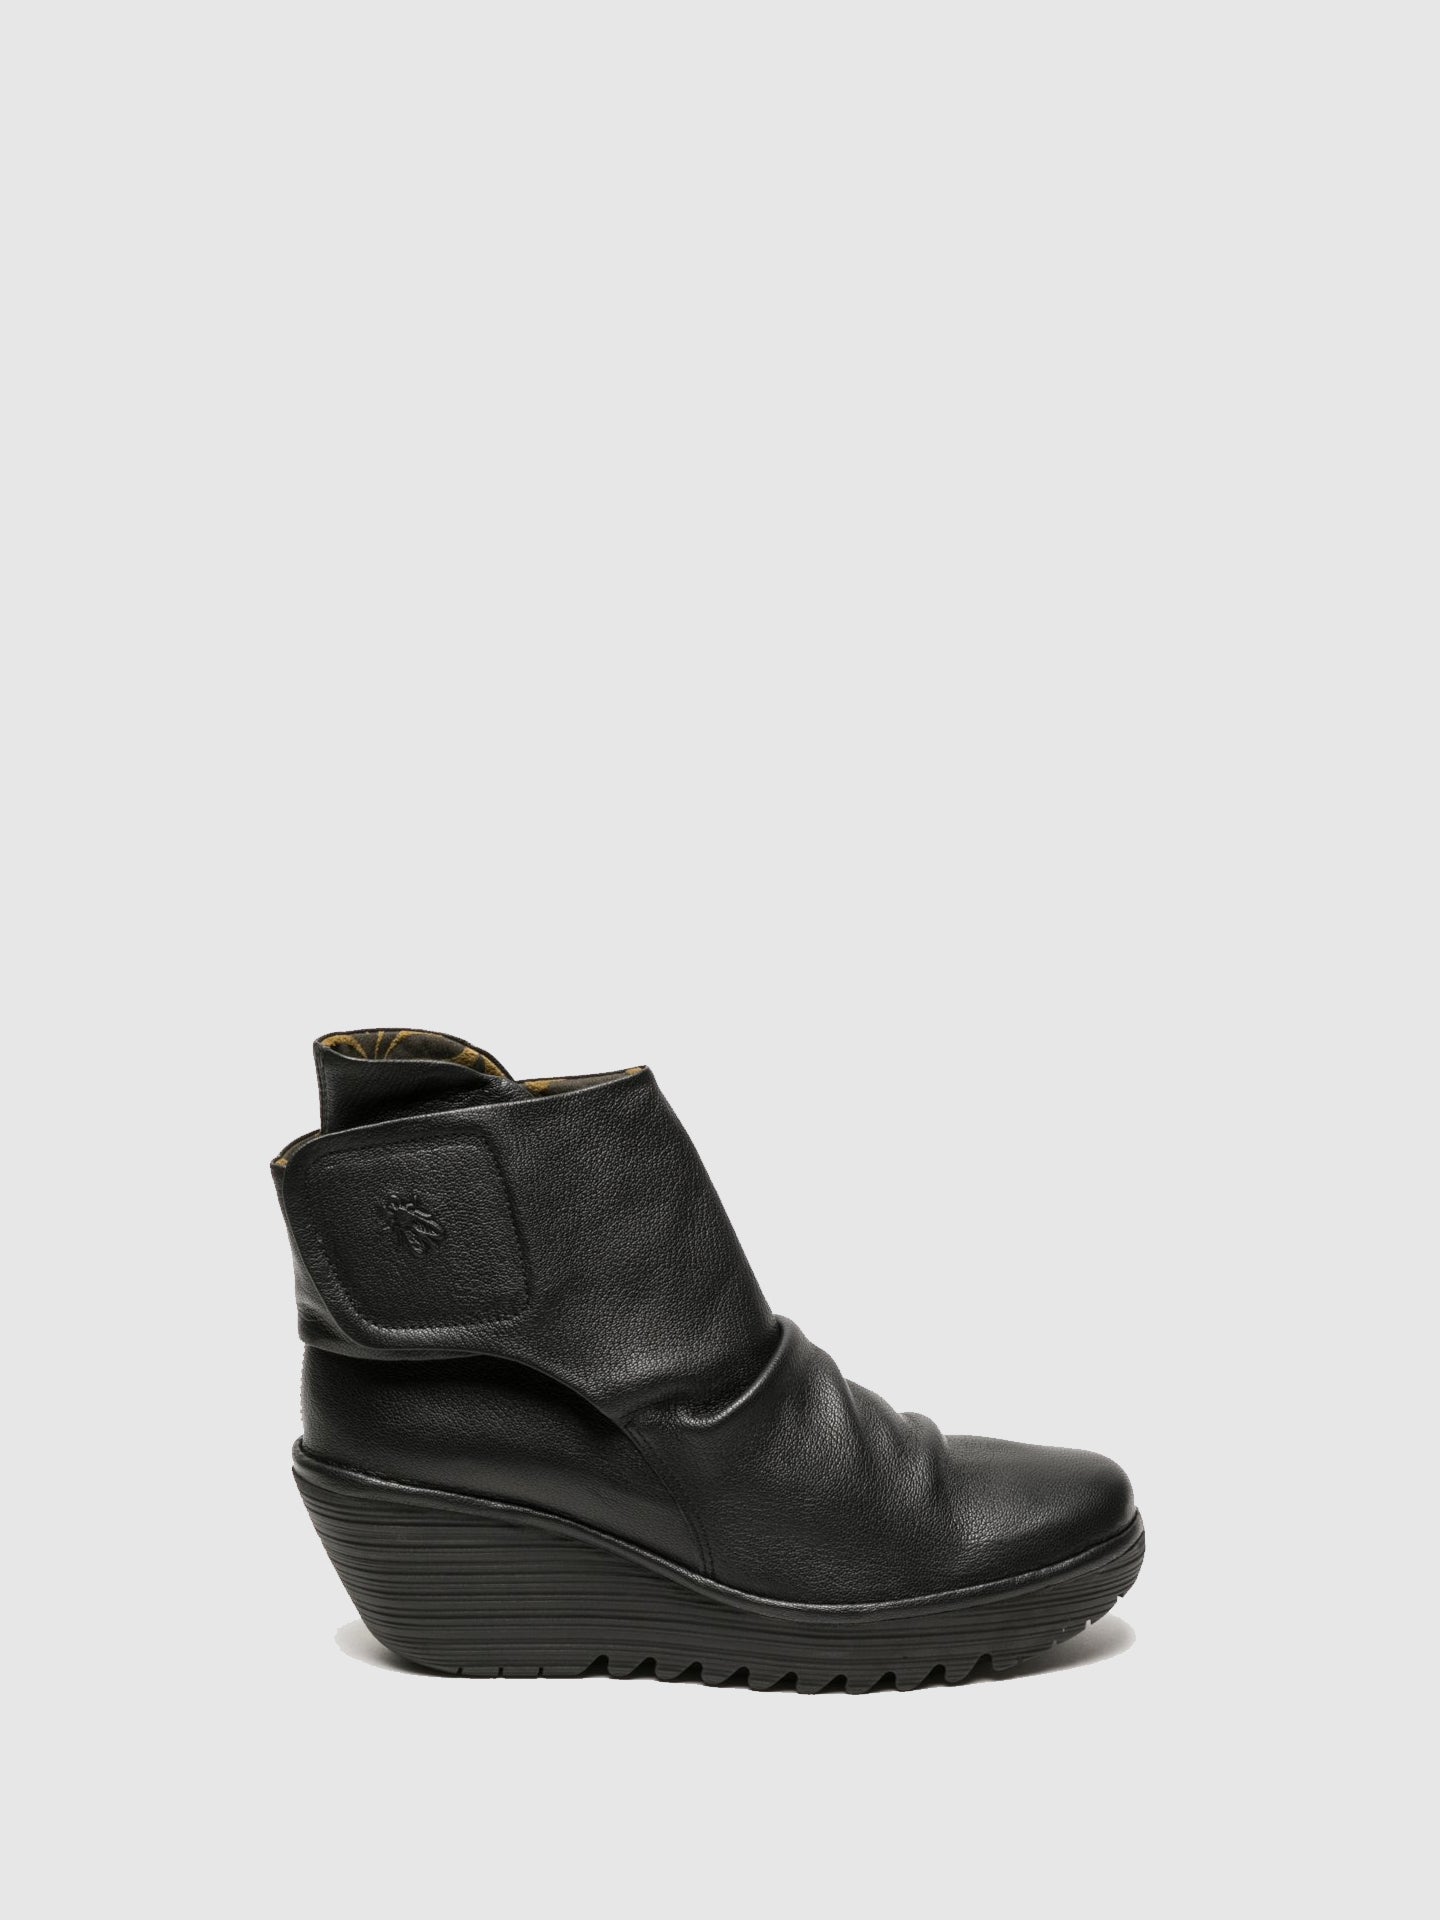 Fly London Coal Black Velcro Ankle Boots